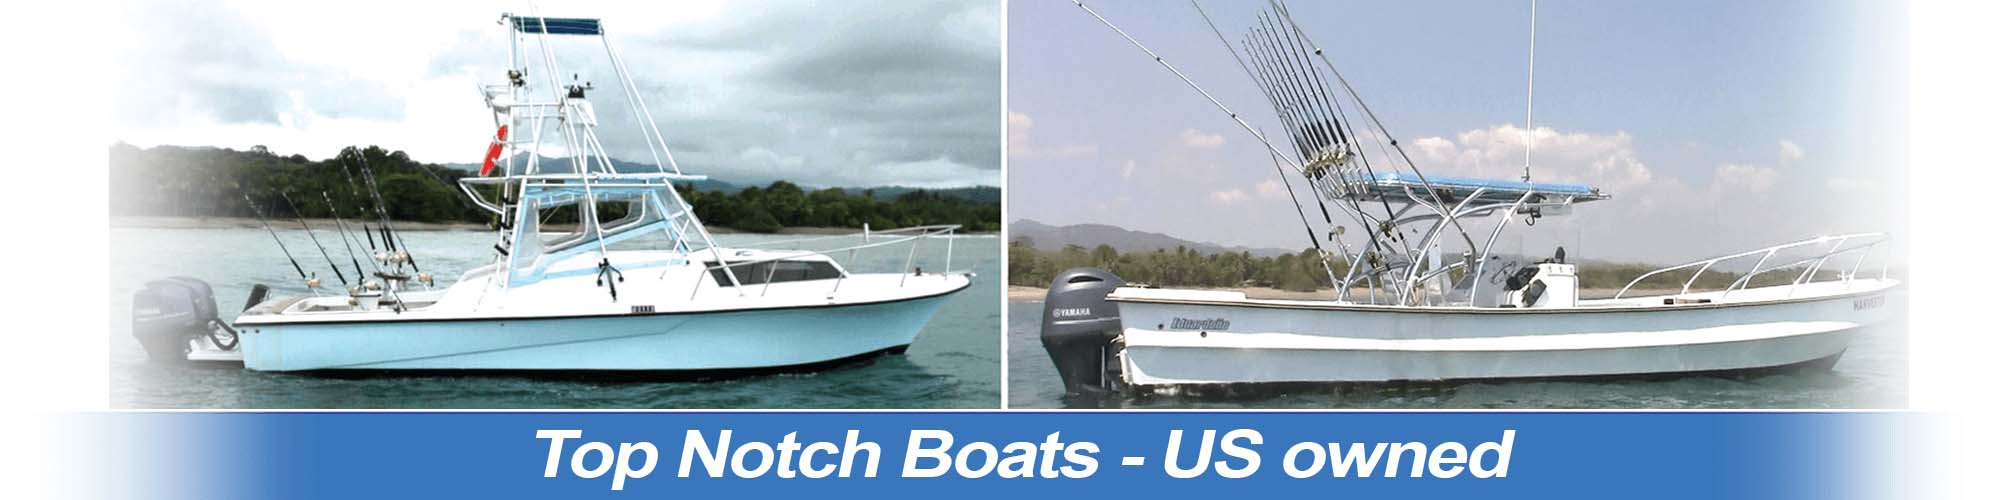 Top Notch boats - US Owned